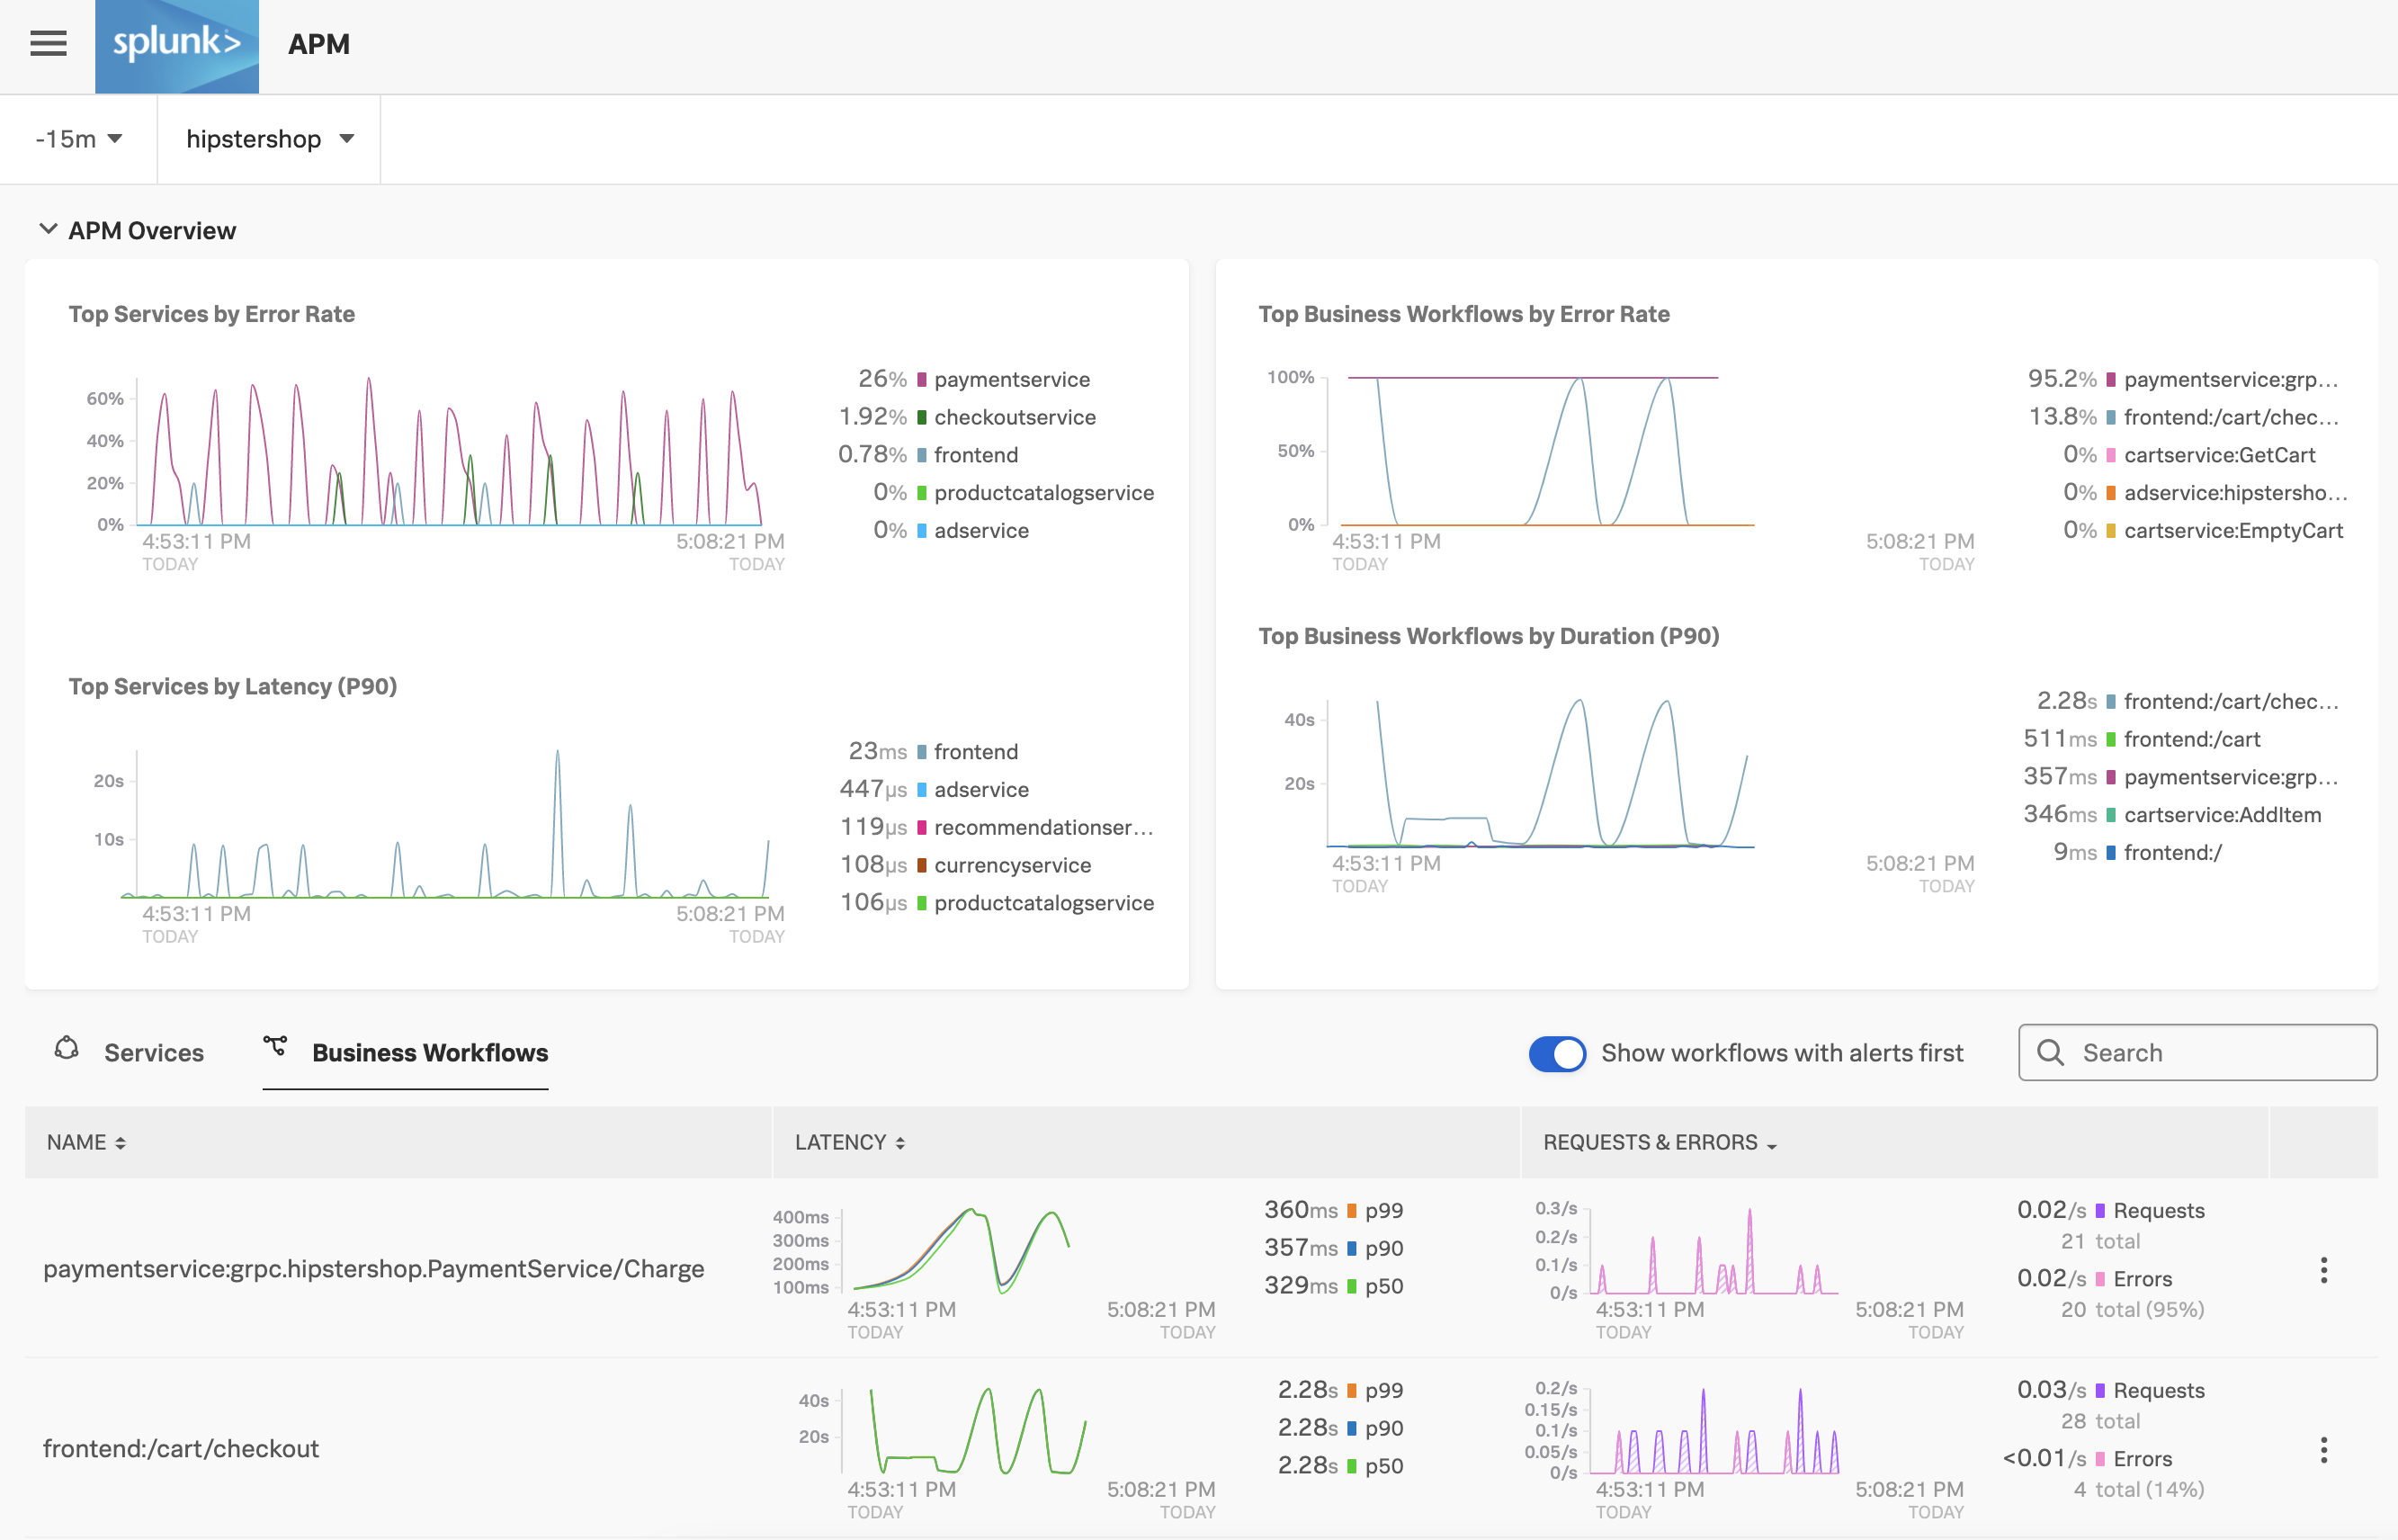 This screenshot shows the APM Overview page, which has charts of latency and requests/errors of all Business Workflows.